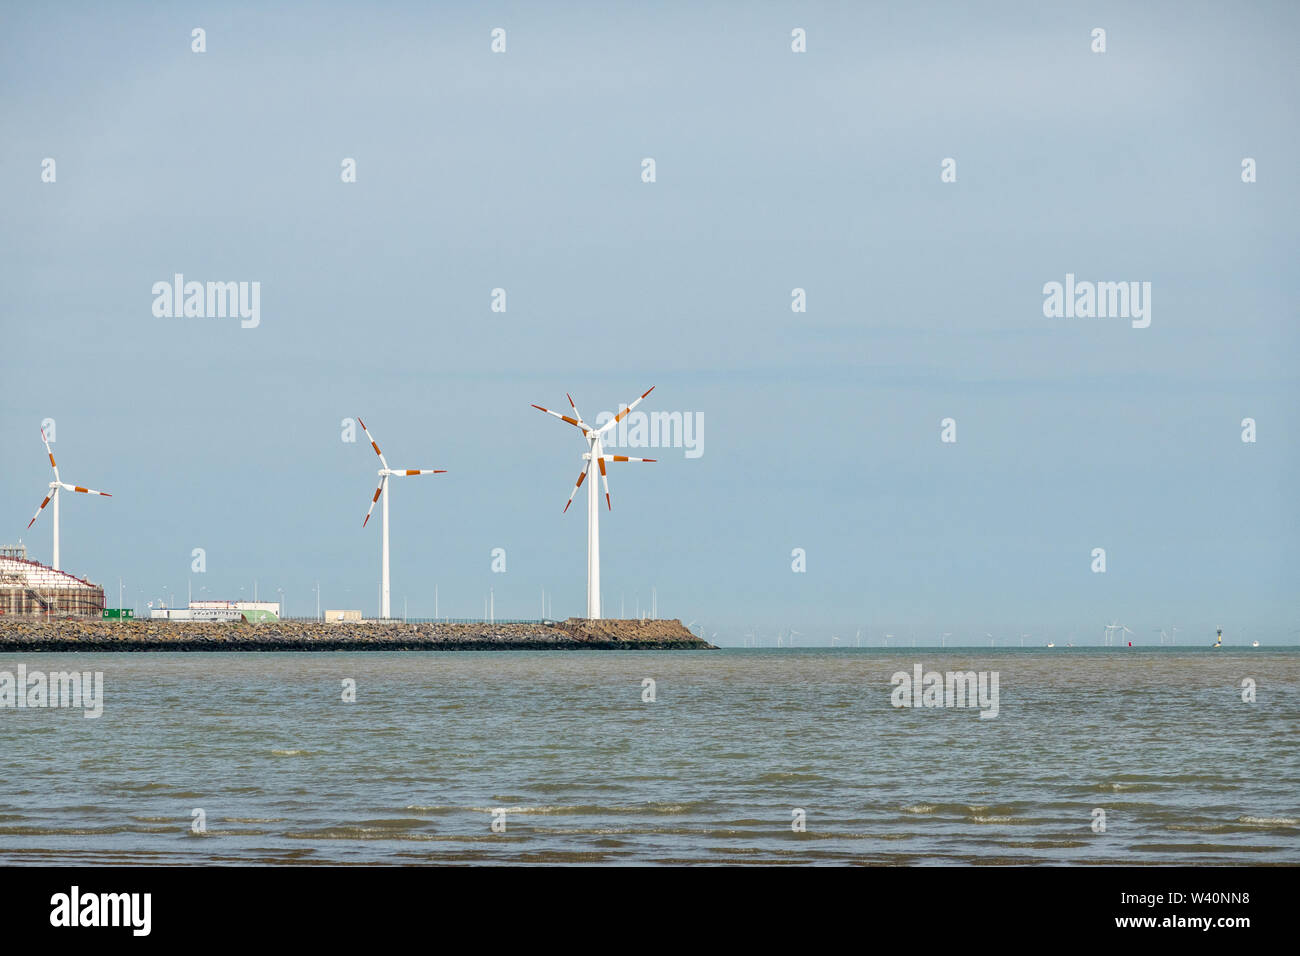 Knokke-Heist, Flanders, Belgium -  June 18, 2019: LNG terminal in port of Zeebrugge has windmils, but far on the horizon, barely visible, are more of Stock Photo